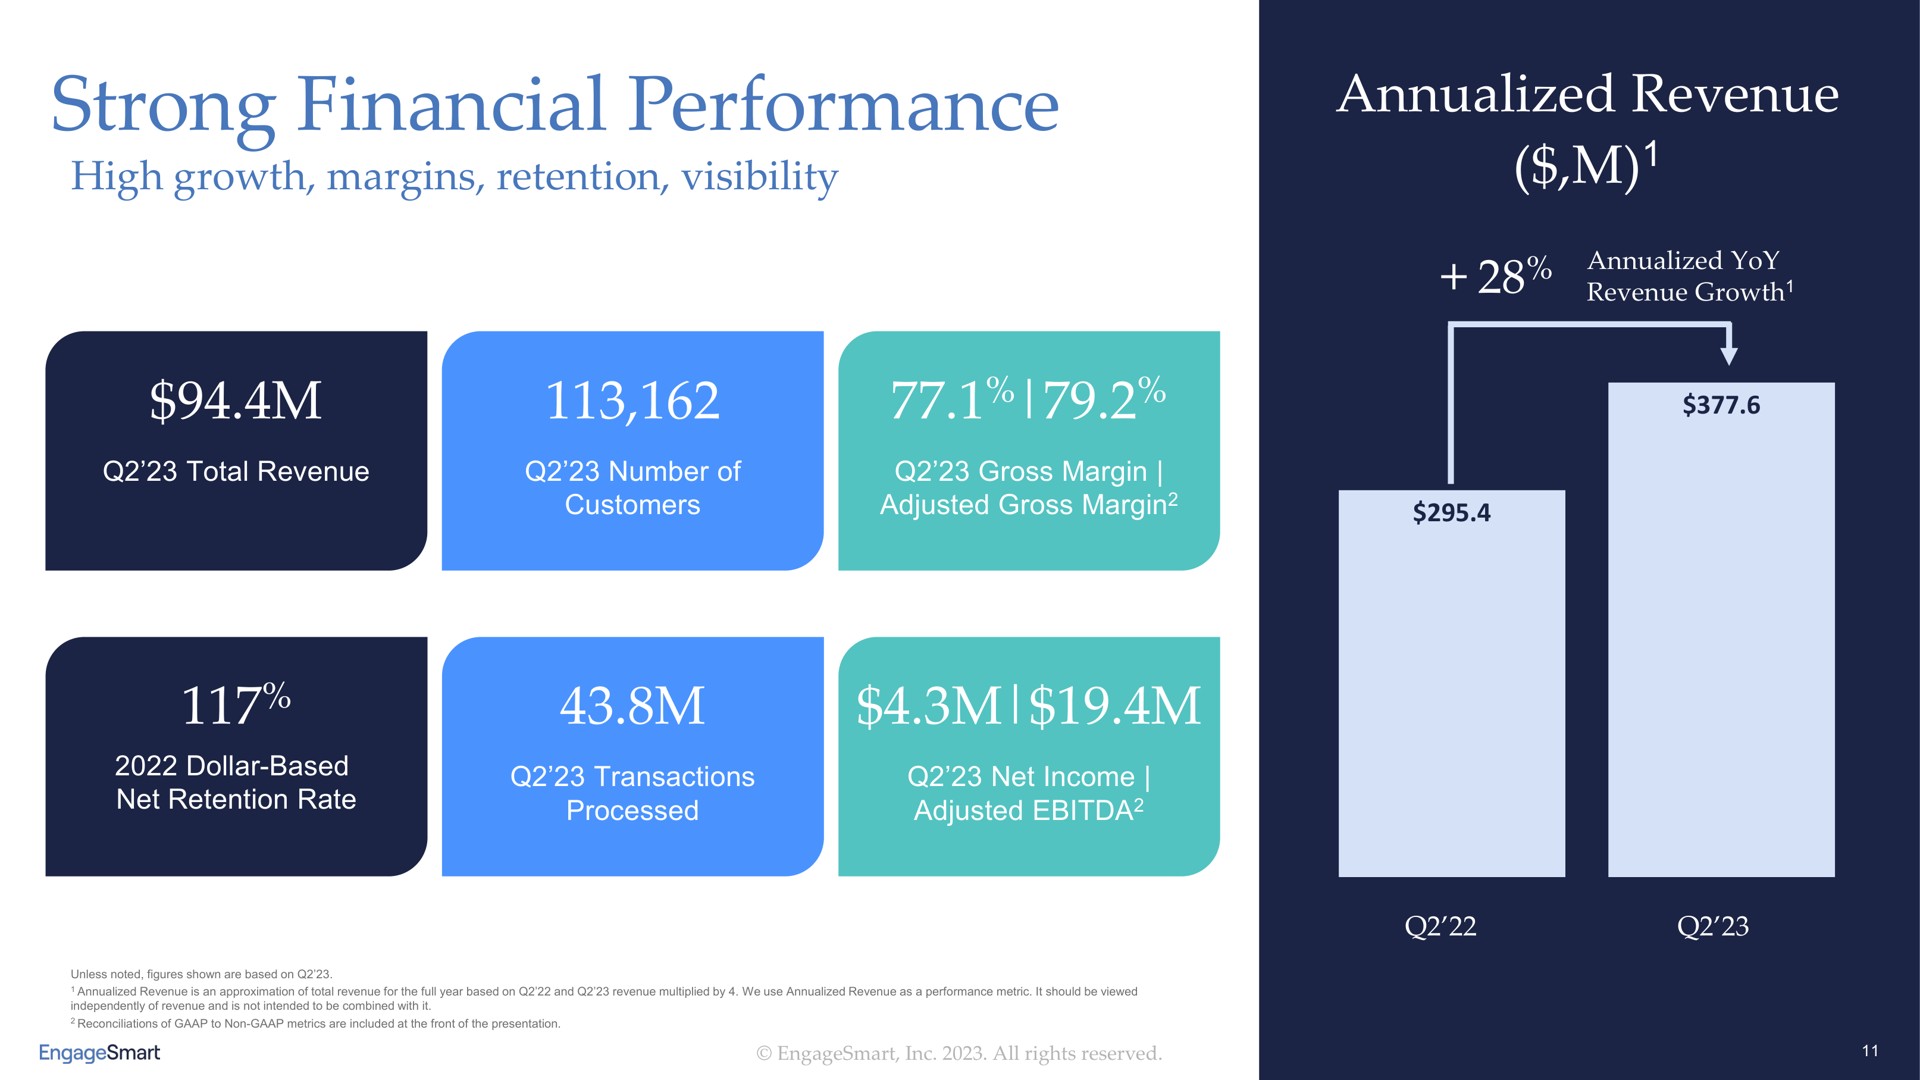 strong financial performance | EngageSmart